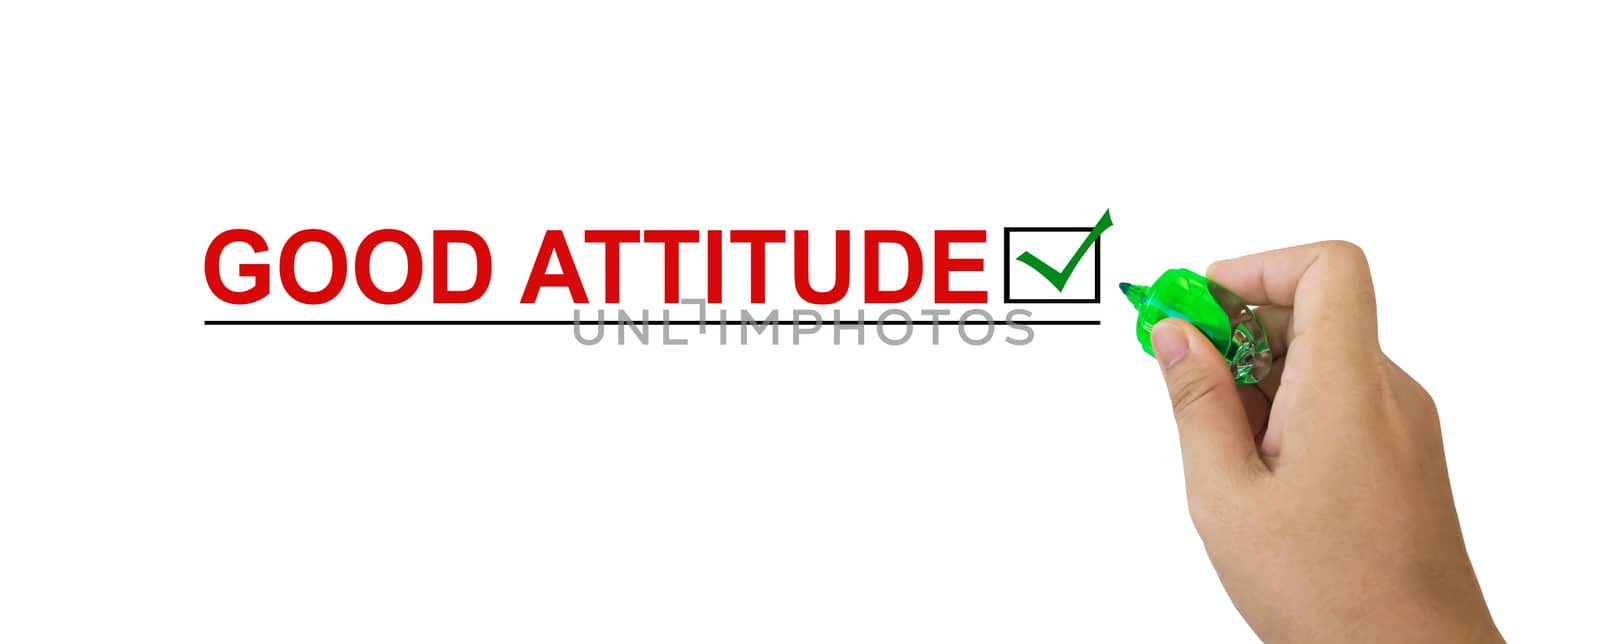 Text good attitude in red colour with isolated hand and marker pen writing on white background